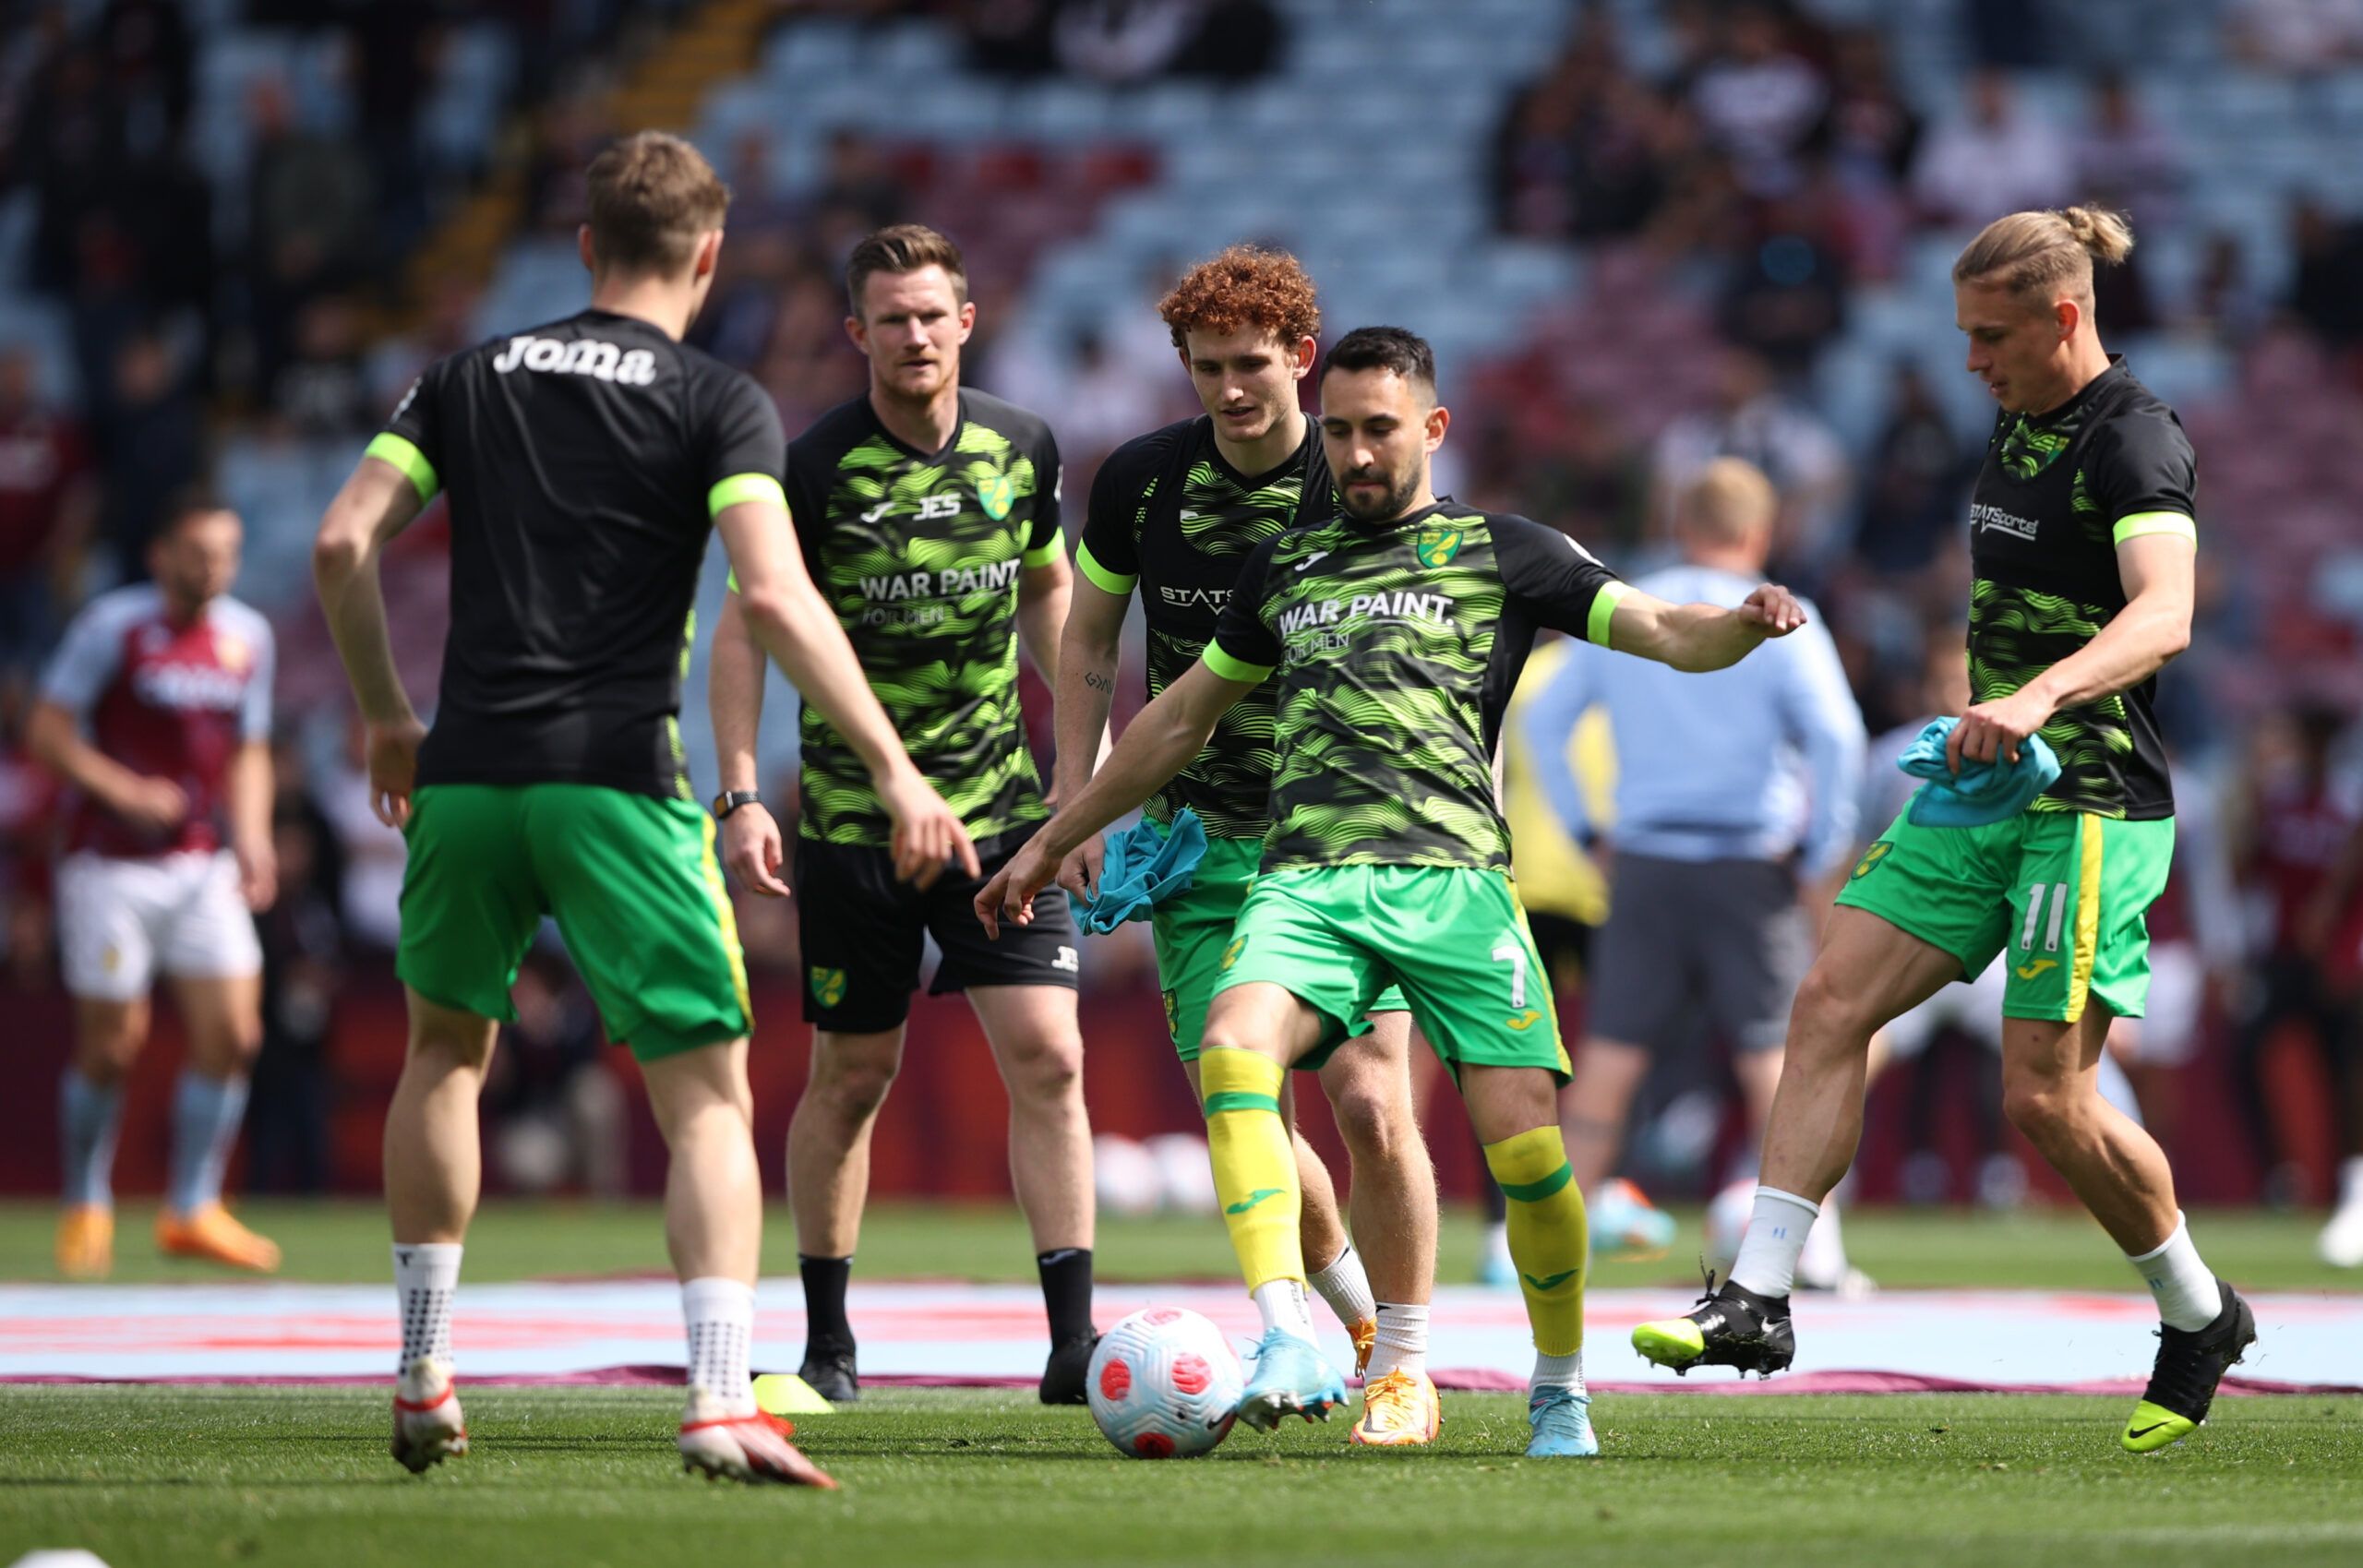 Soccer Football - Premier League - Aston Villa v Norwich City - Villa Park, Birmingham, Britain - April 30, 2022 Norwich City's Lukas Rupp, Przemyslaw Placheta and Josh Sargent with teammates during the warm up before the match Action Images via Reuters/Molly Darlington EDITORIAL USE ONLY. No use with unauthorized audio, video, data, fixture lists, club/league logos or 'live' services. Online in-match use limited to 75 images, no video emulation. No use in betting, games or single club /league/p